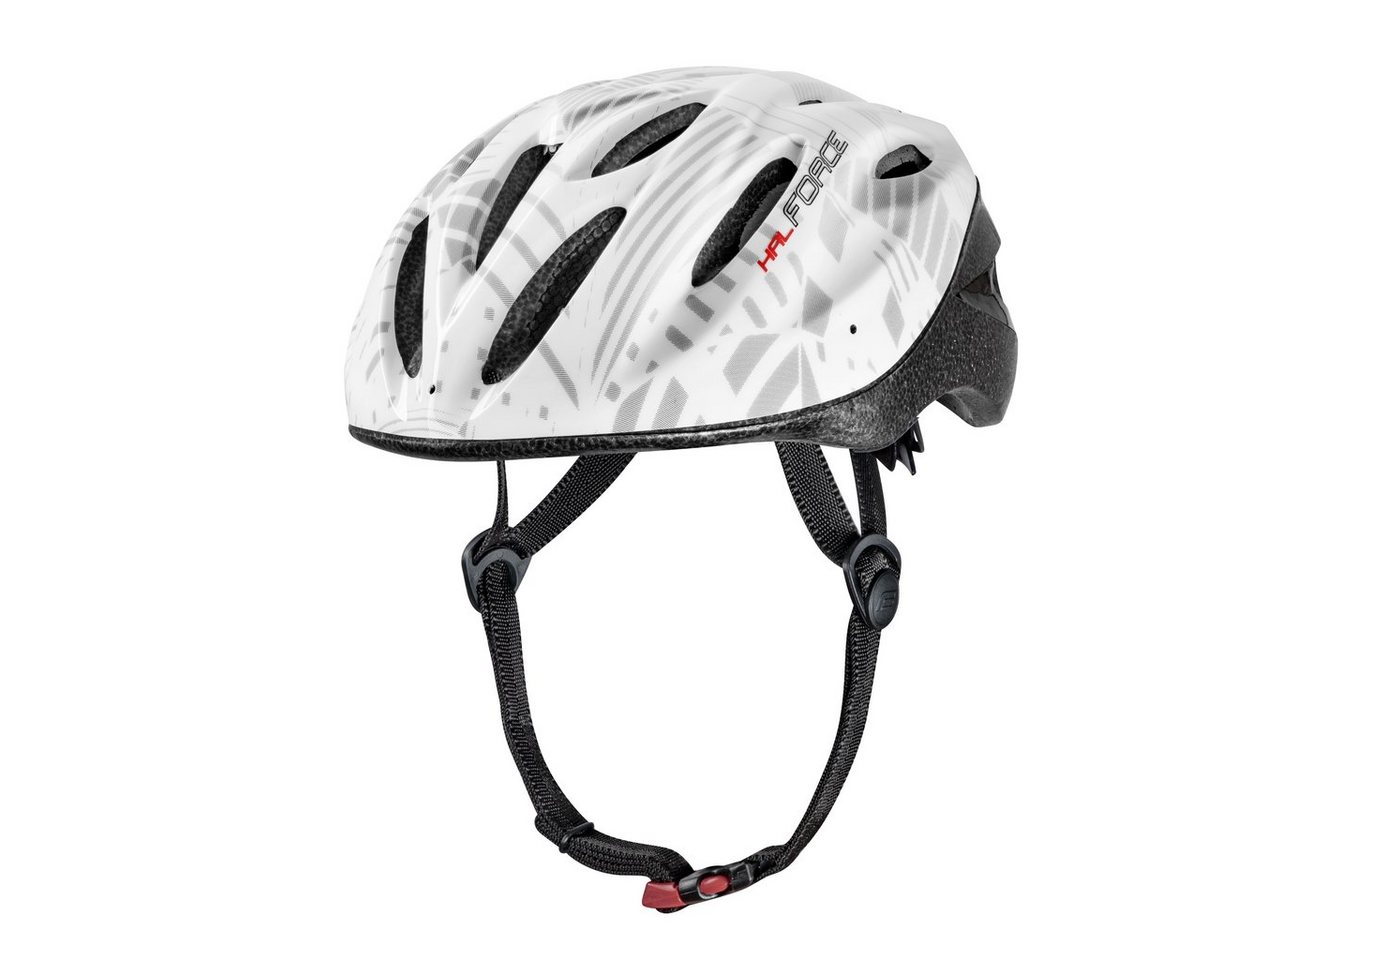 FORCE Fahrradhelm Helm FORCE HAL white XS-S von FORCE